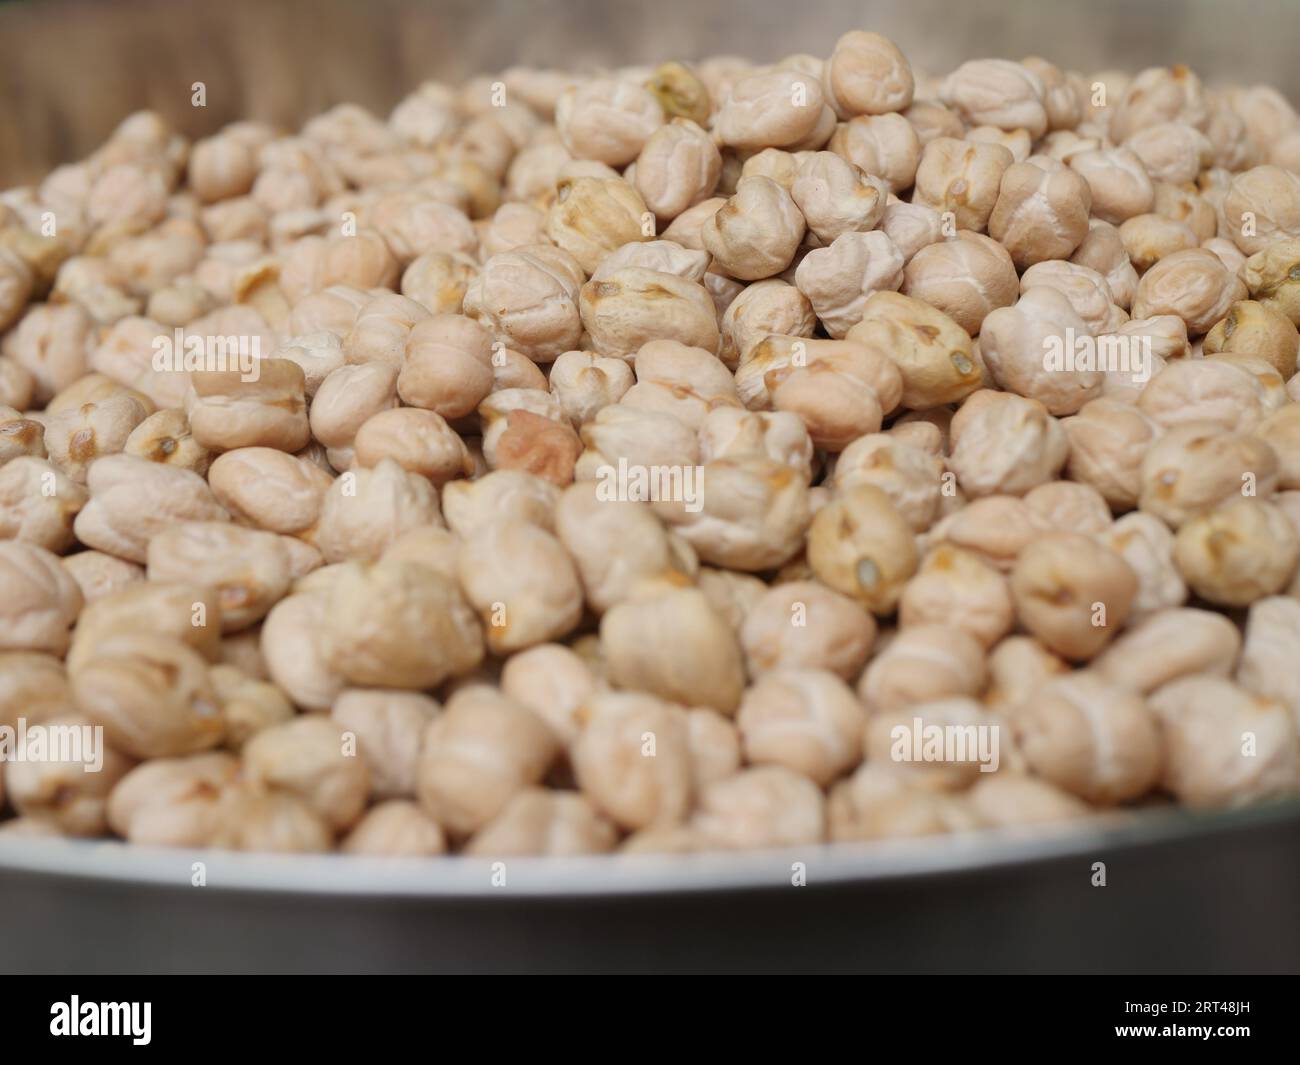 raw chickpea on plate , side angle view Stock Photo